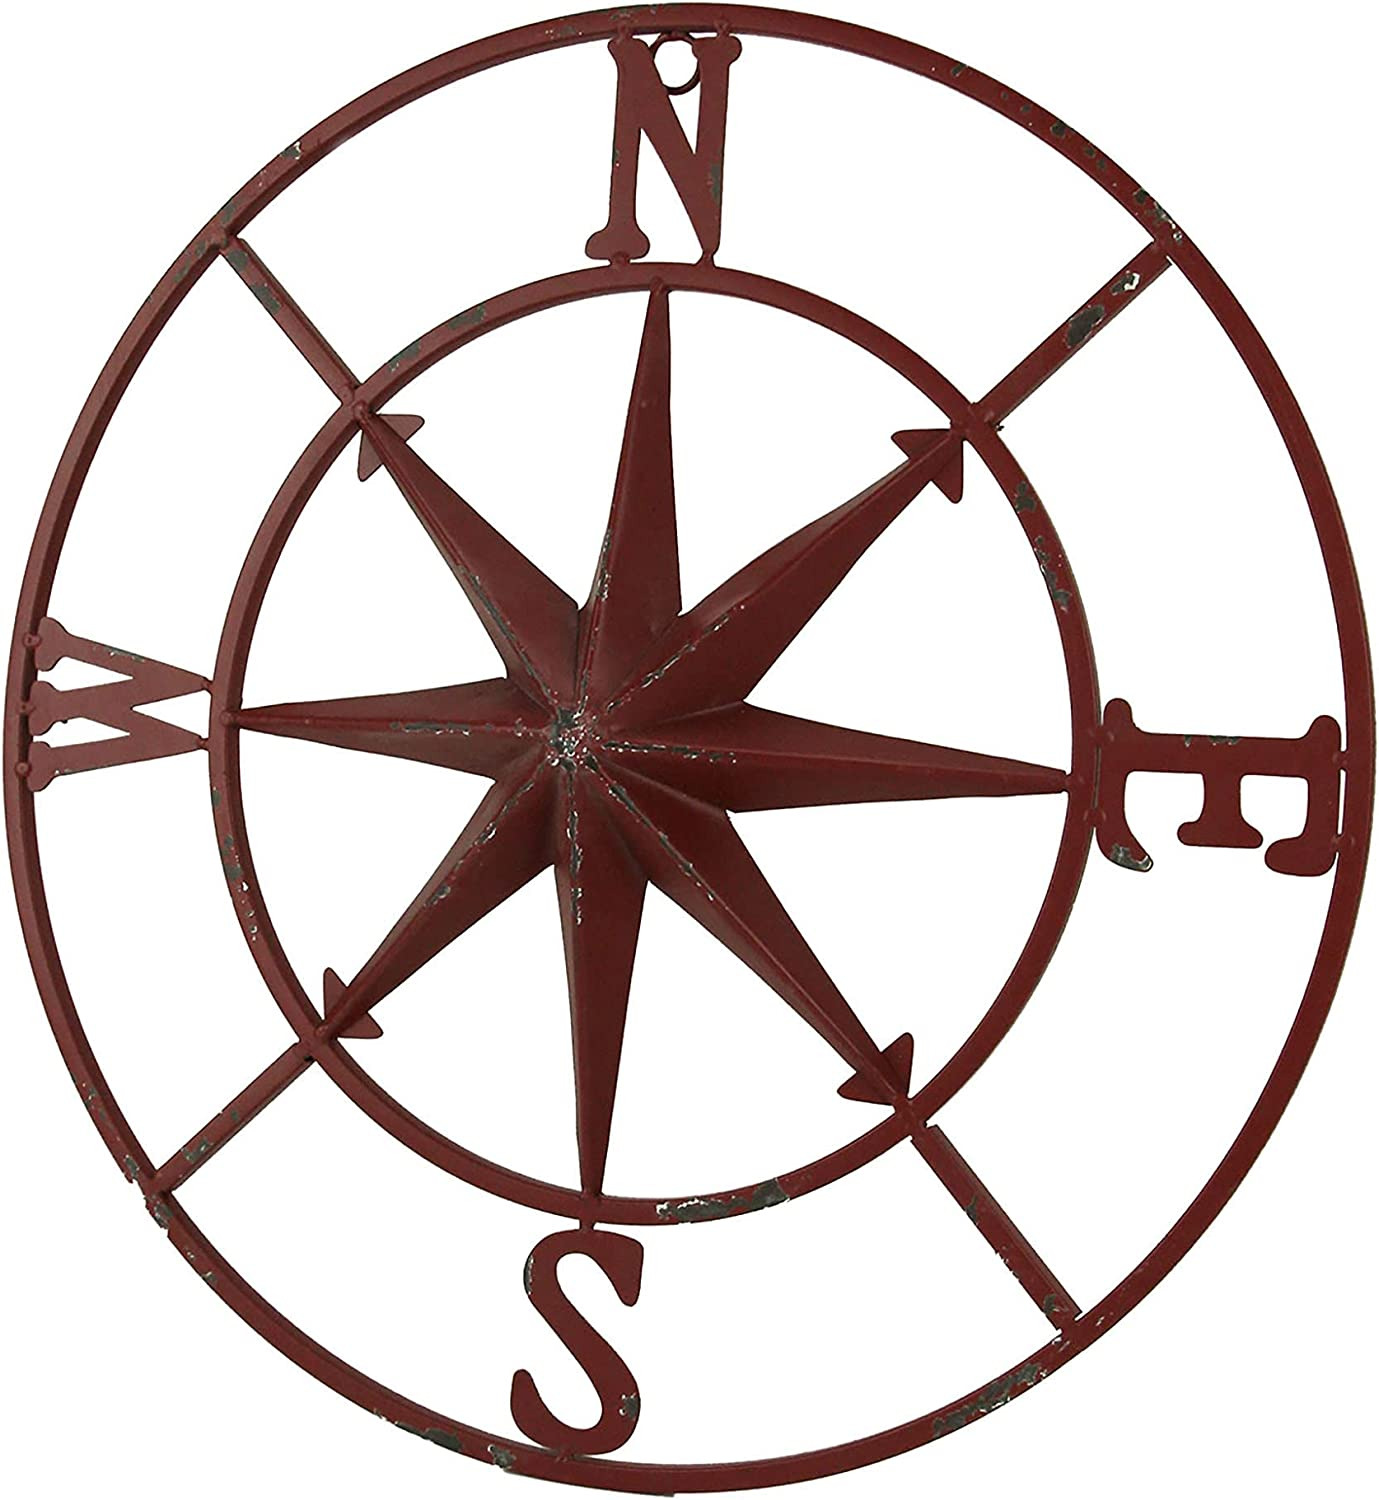 Distressed Metal Nautical Compass Rose Indoor/Outdoor Wall Hanging - Red